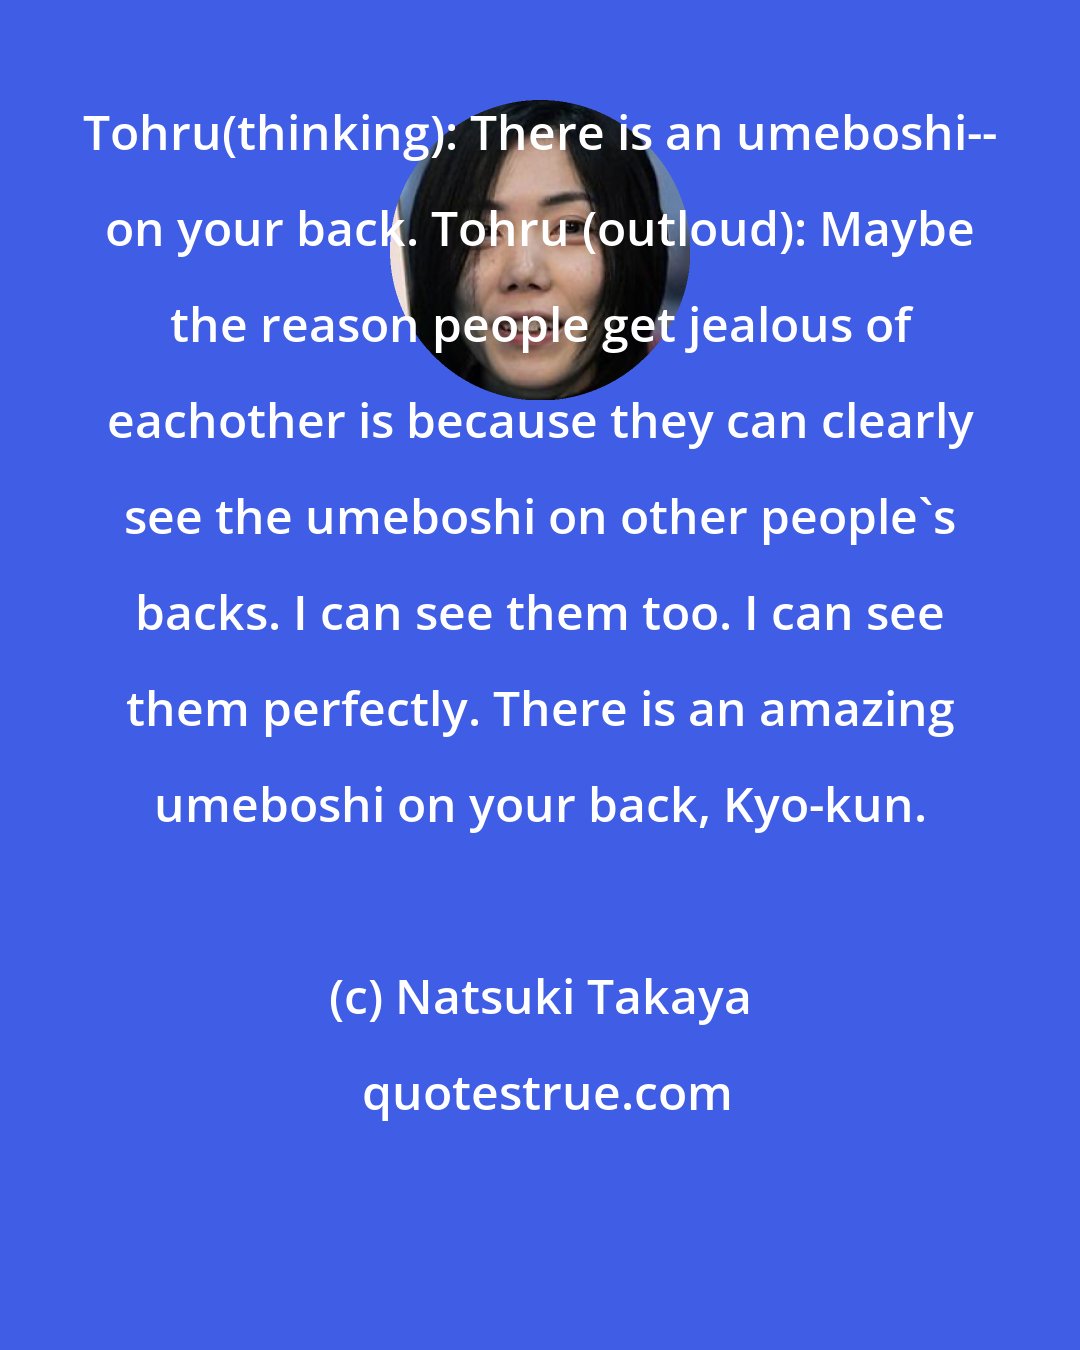 Natsuki Takaya: Tohru(thinking): There is an umeboshi-- on your back. Tohru (outloud): Maybe the reason people get jealous of eachother is because they can clearly see the umeboshi on other people's backs. I can see them too. I can see them perfectly. There is an amazing umeboshi on your back, Kyo-kun.